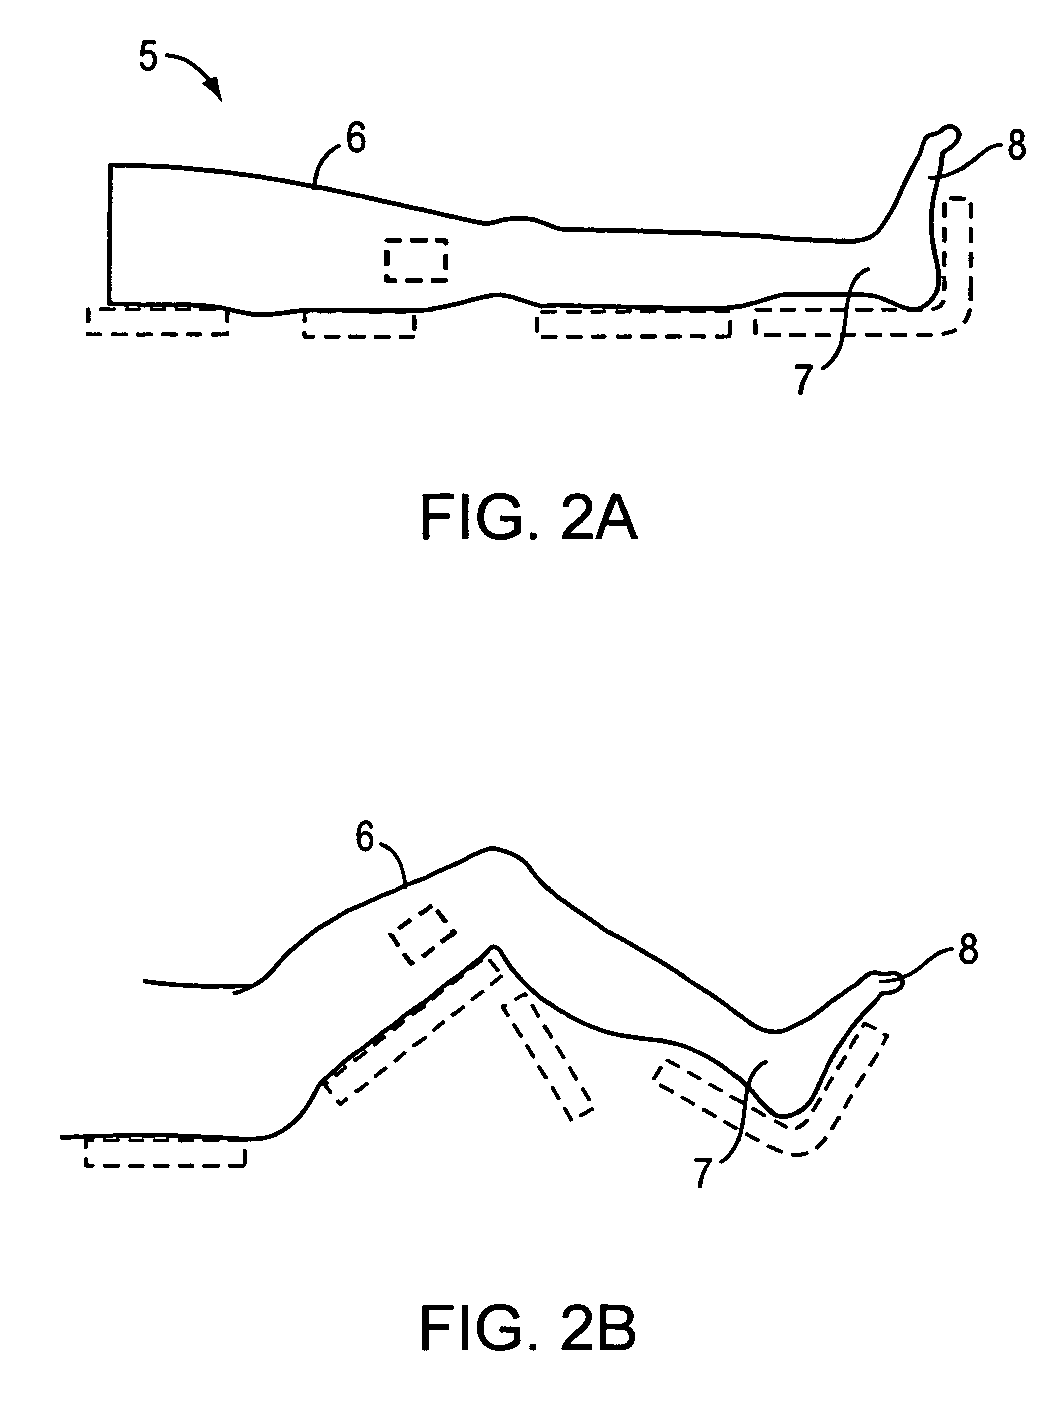 Method and apparatus for aligning a knee for surgery or the like